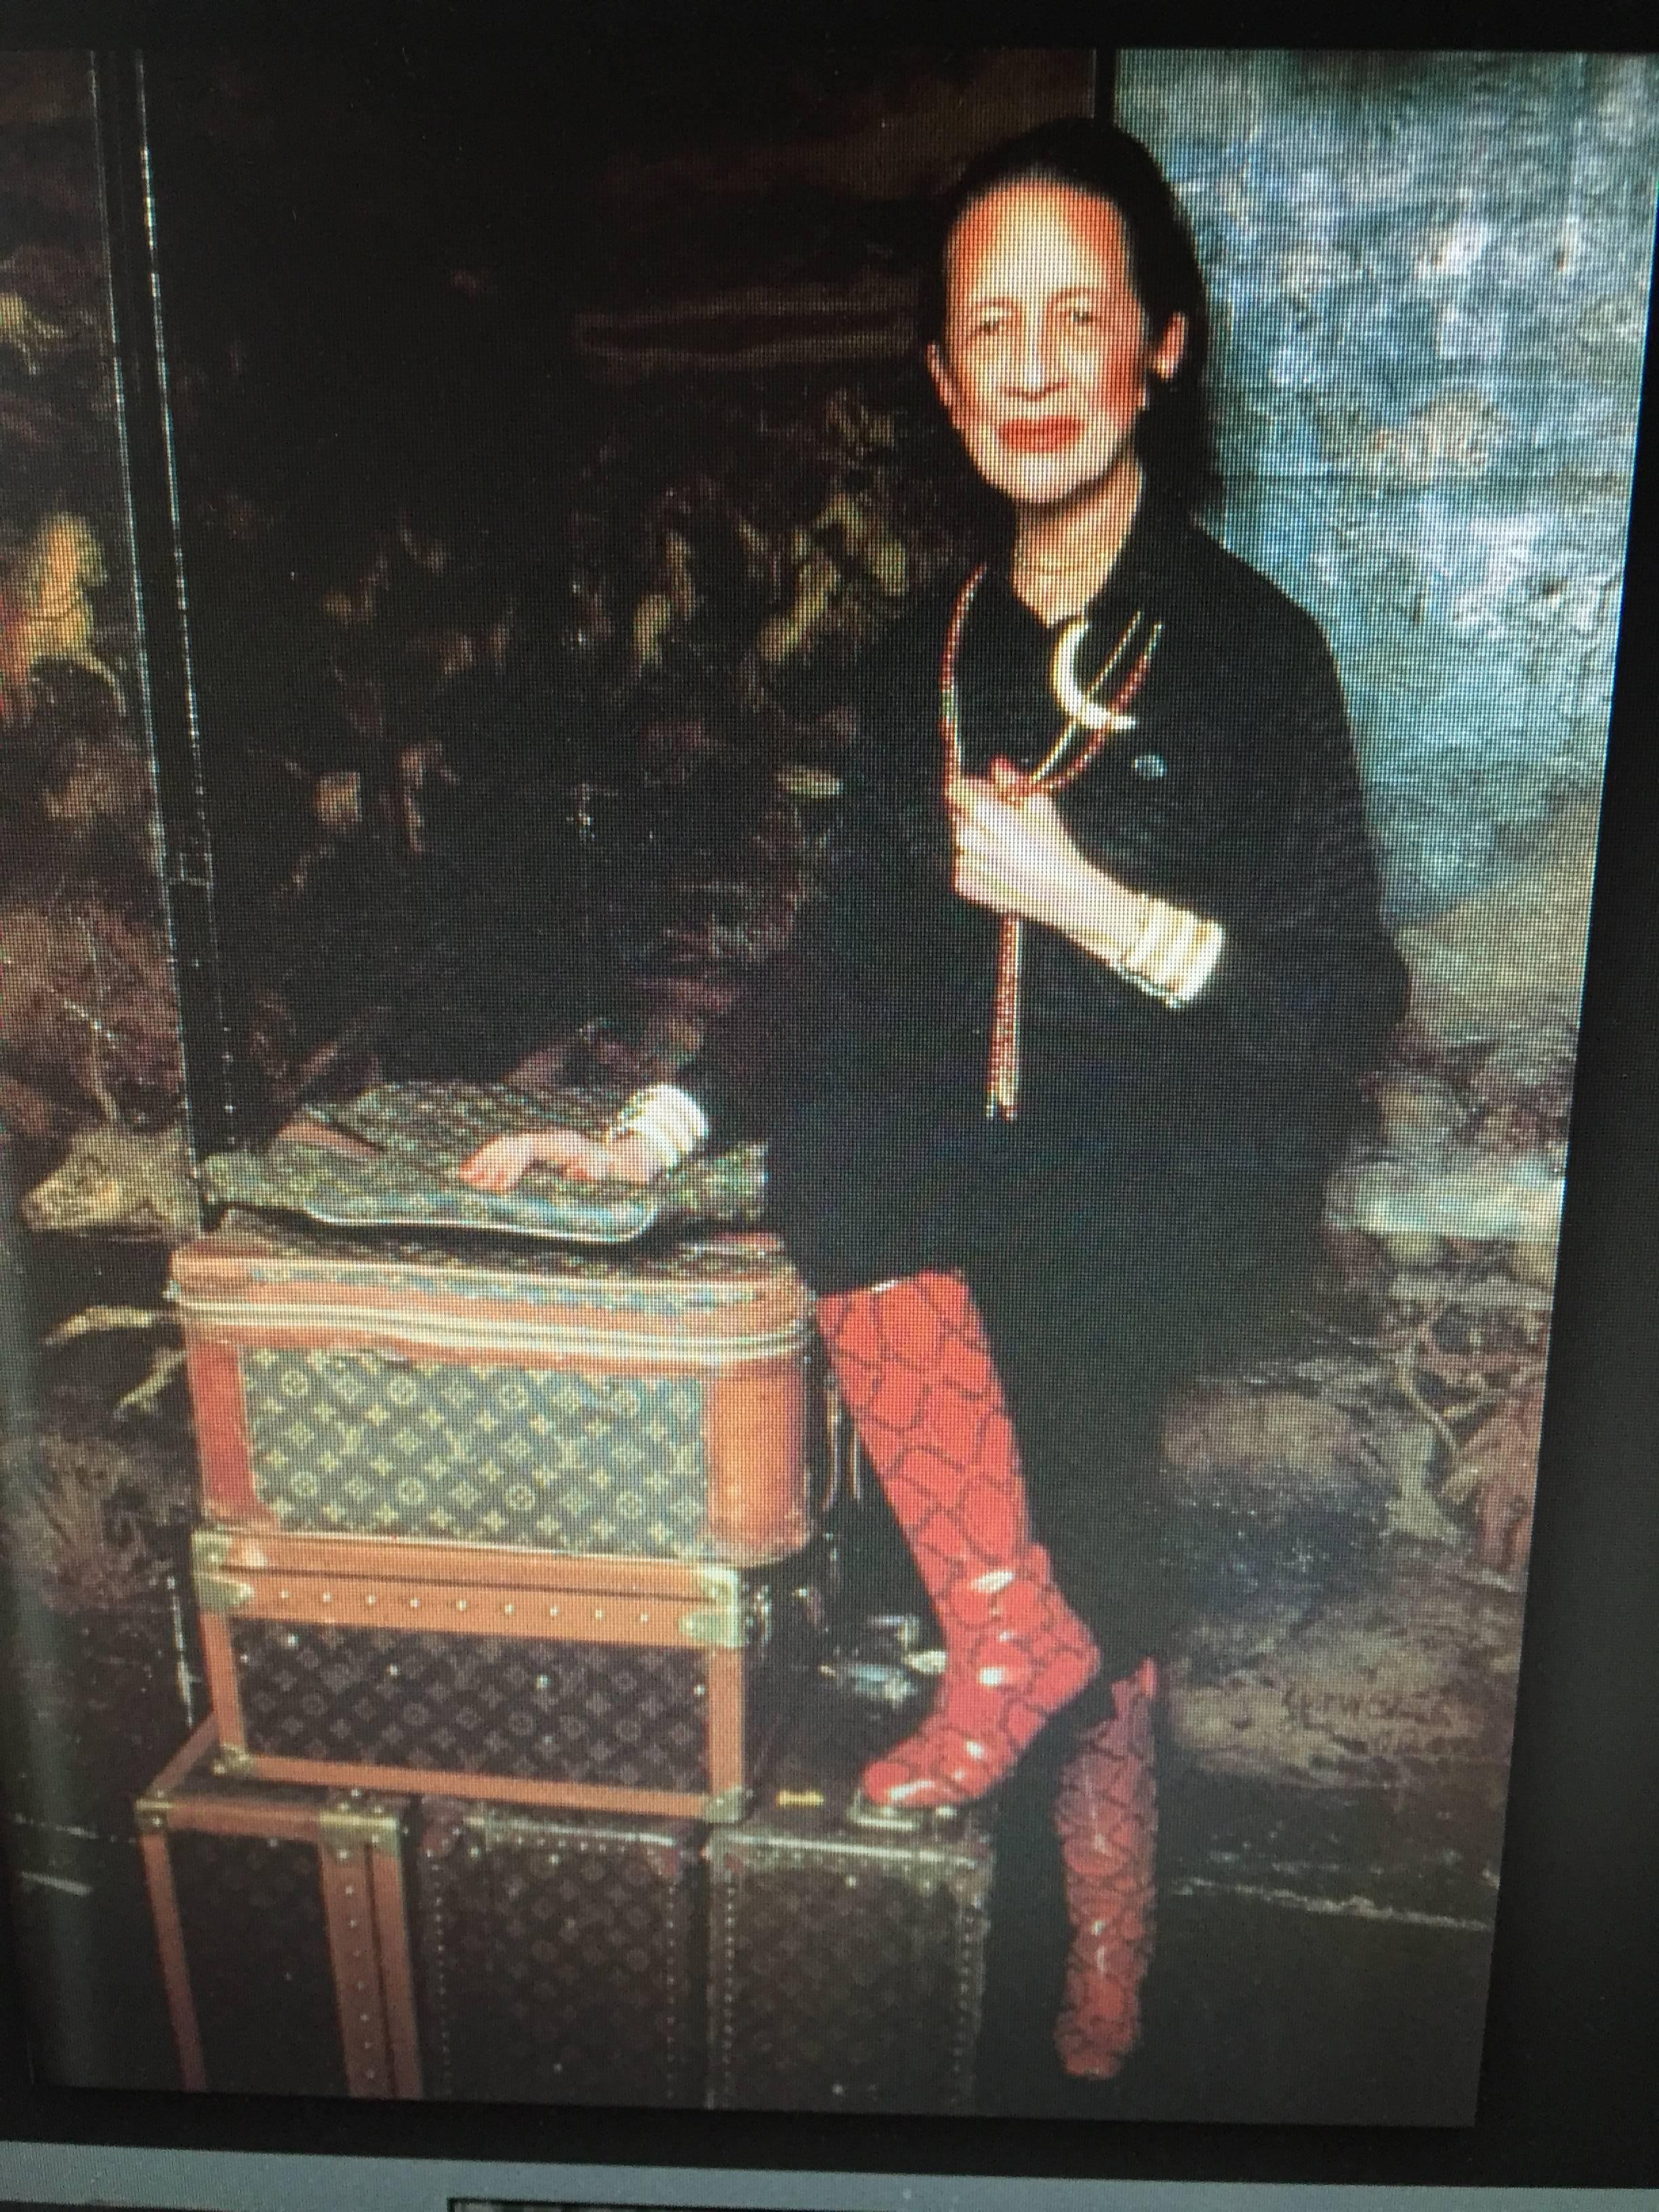  Louis Vuitton Suitcase Owned by Diana Vreeland Iconic Piece of Fashion History 2